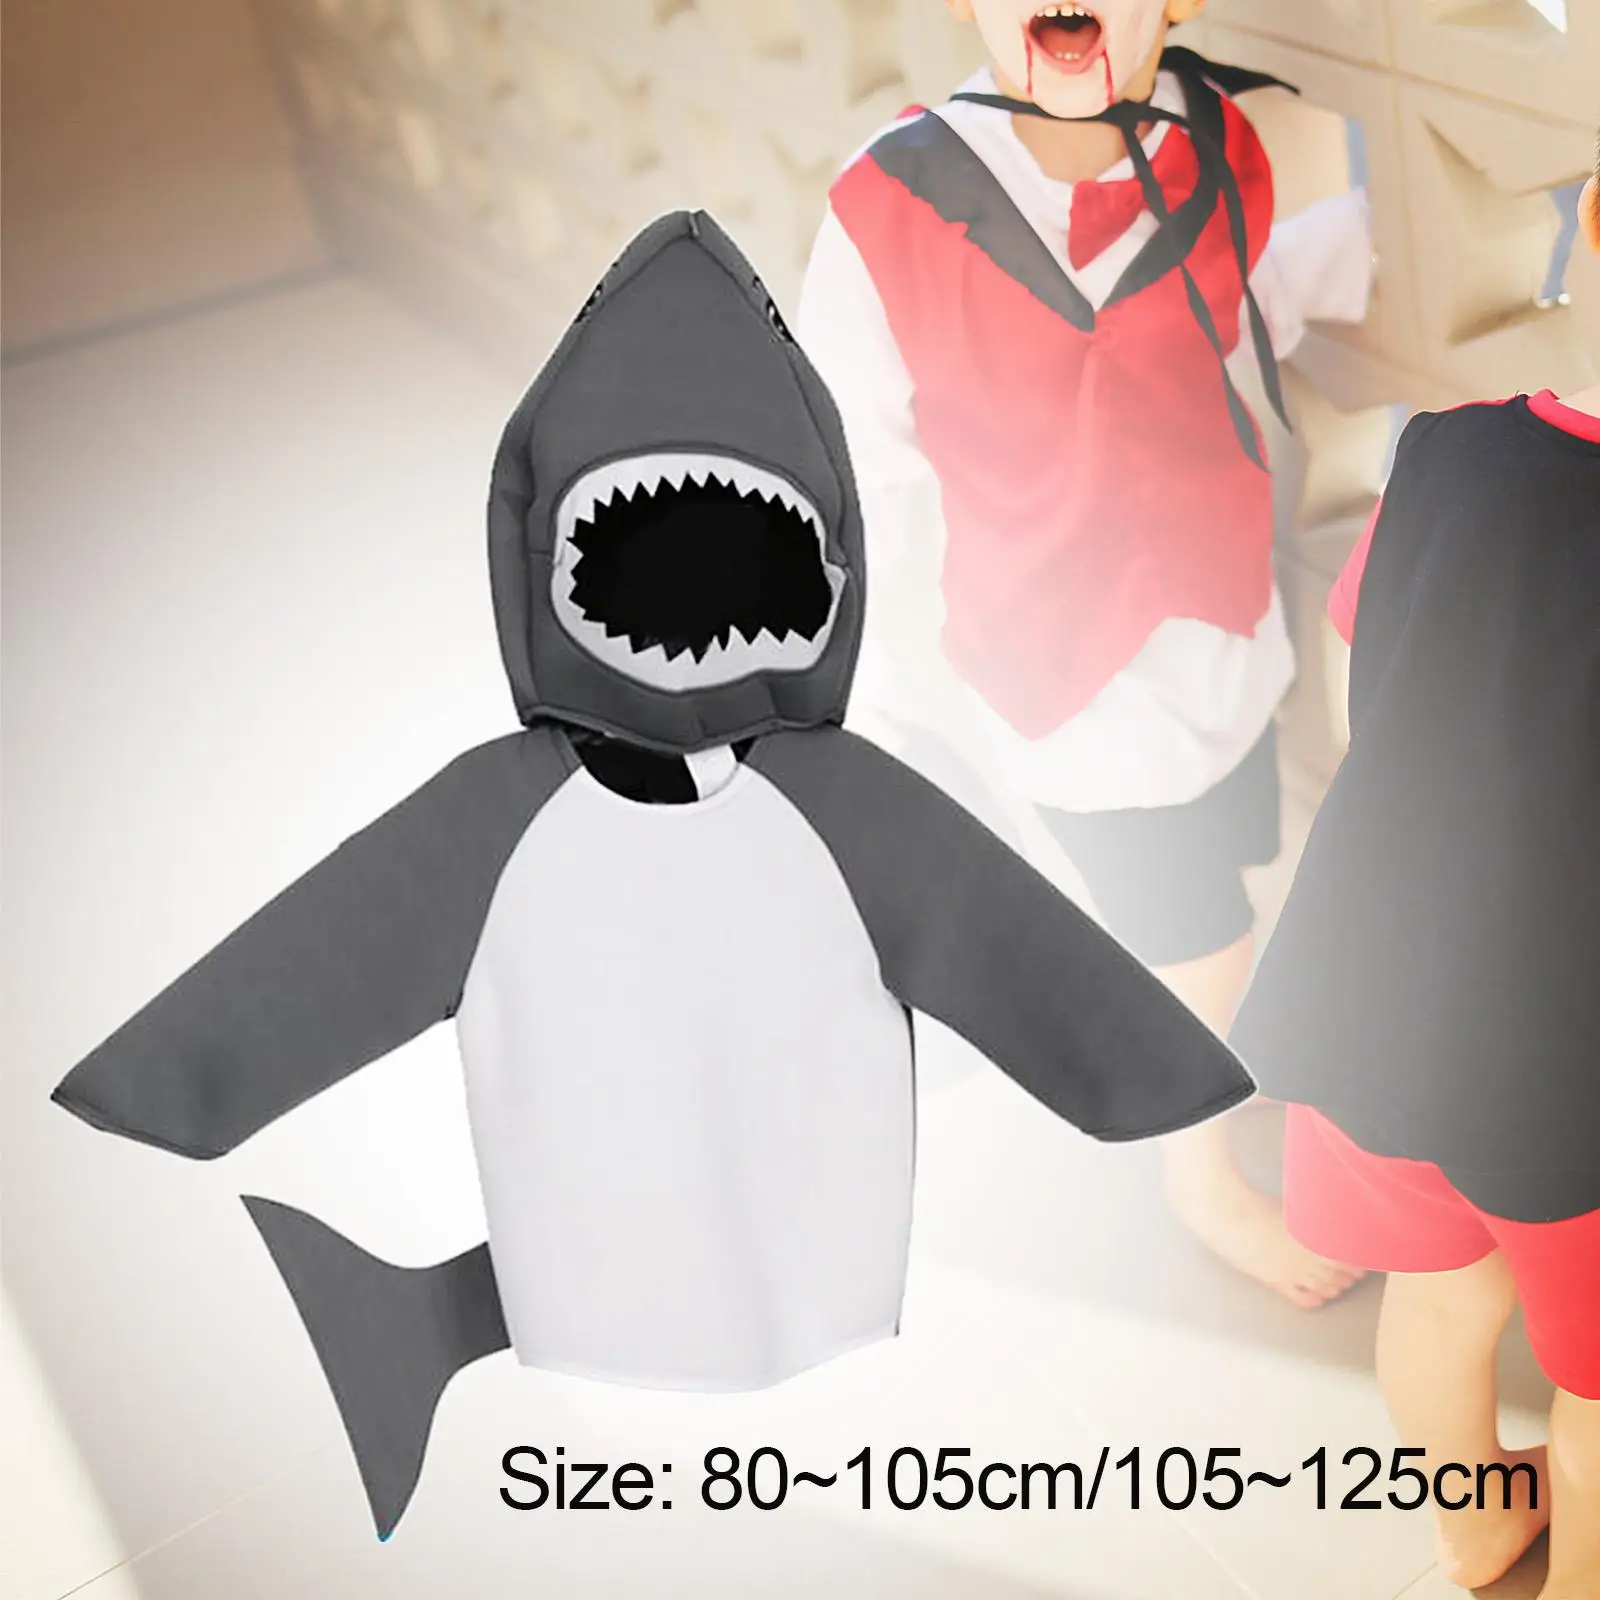 Kids Shark Costume Hoodie Soft for Boys Girls Halloween Dress up for Stage Performance Carnivals Children`s Day Party Toddlers